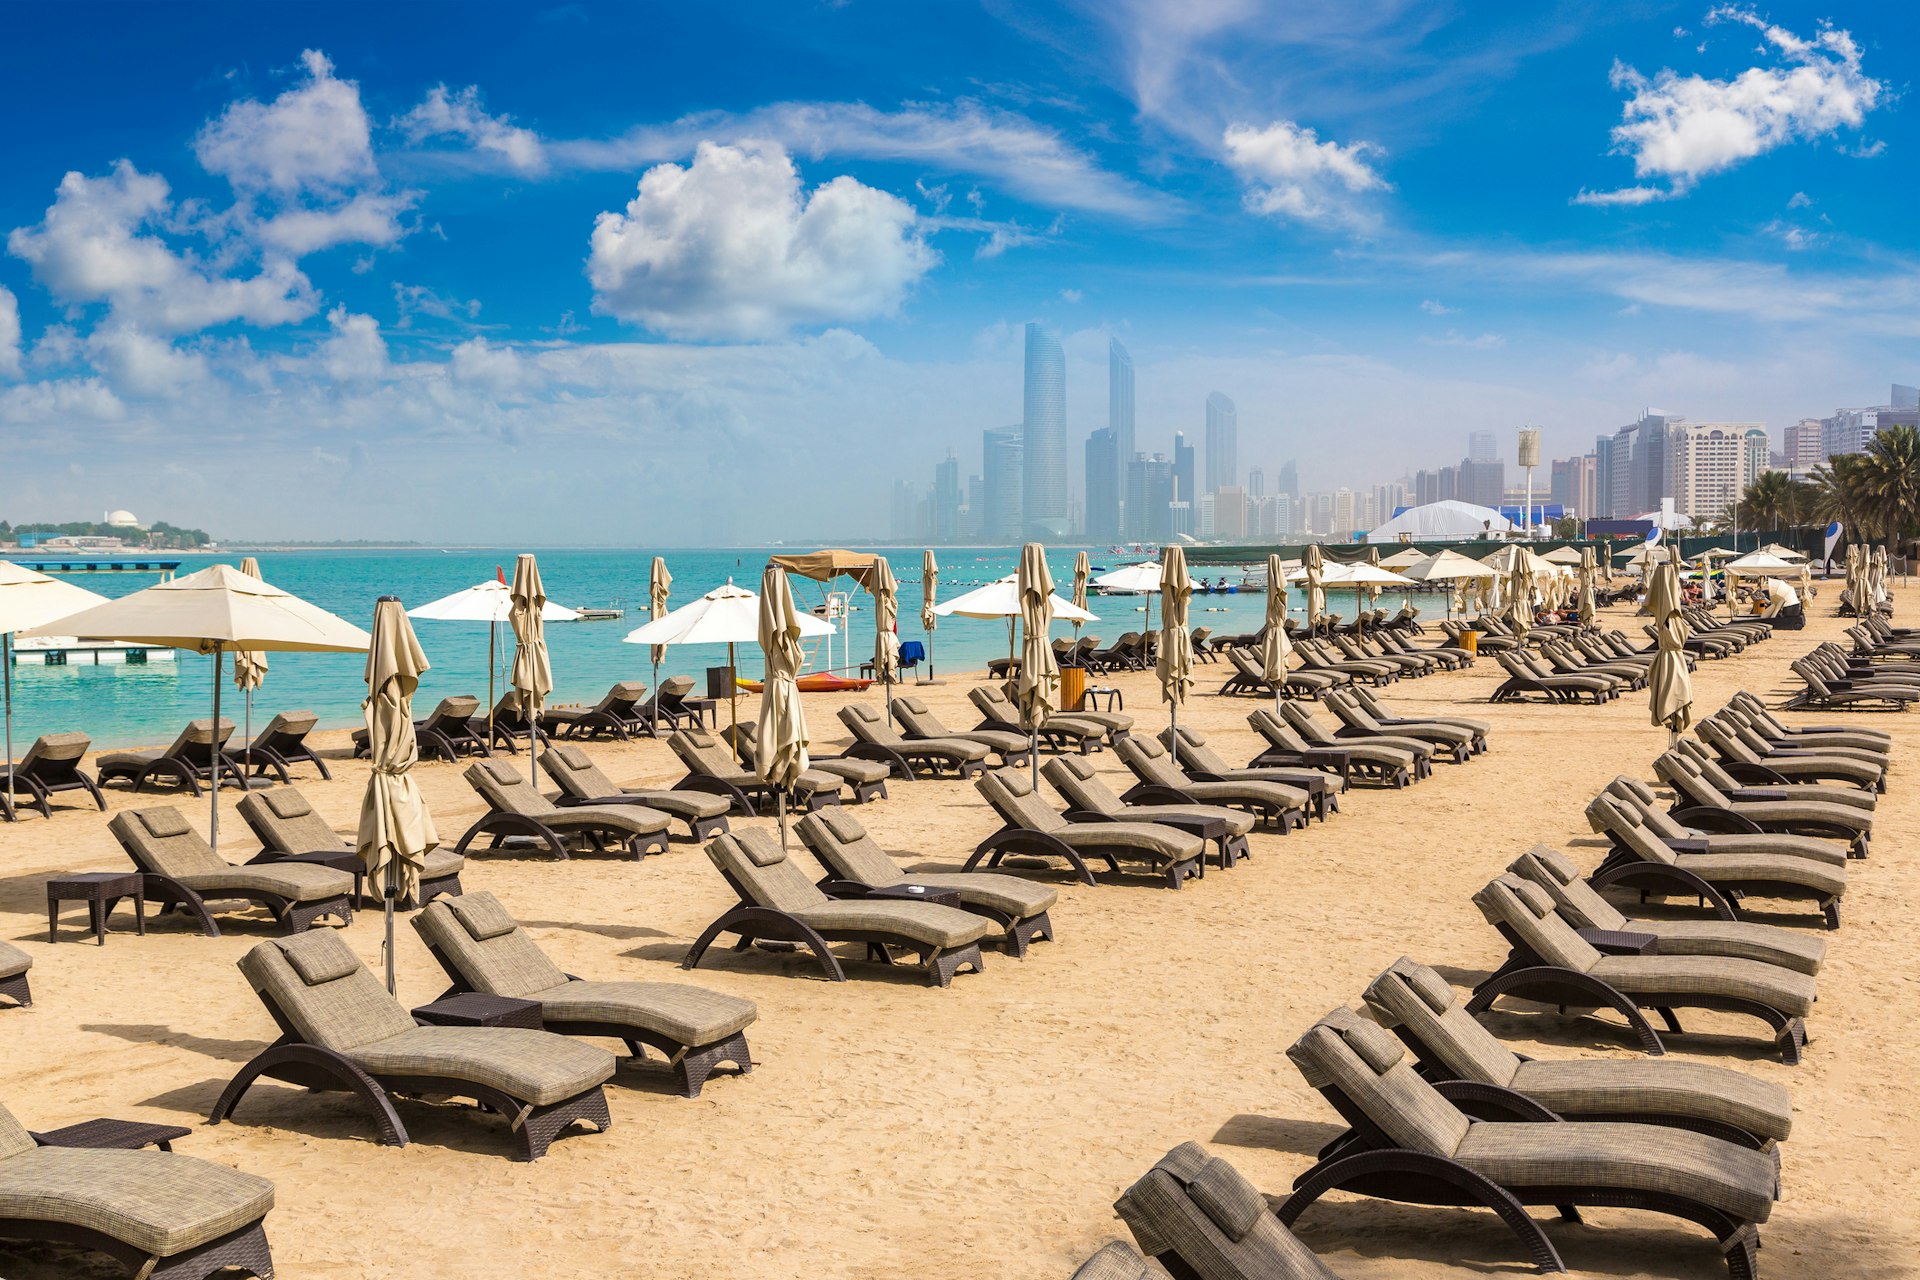 Sunbeds and umbrellas at the beach of a luxury hotel in Abu Dhabi, United Arab Emirates, on a summer day.